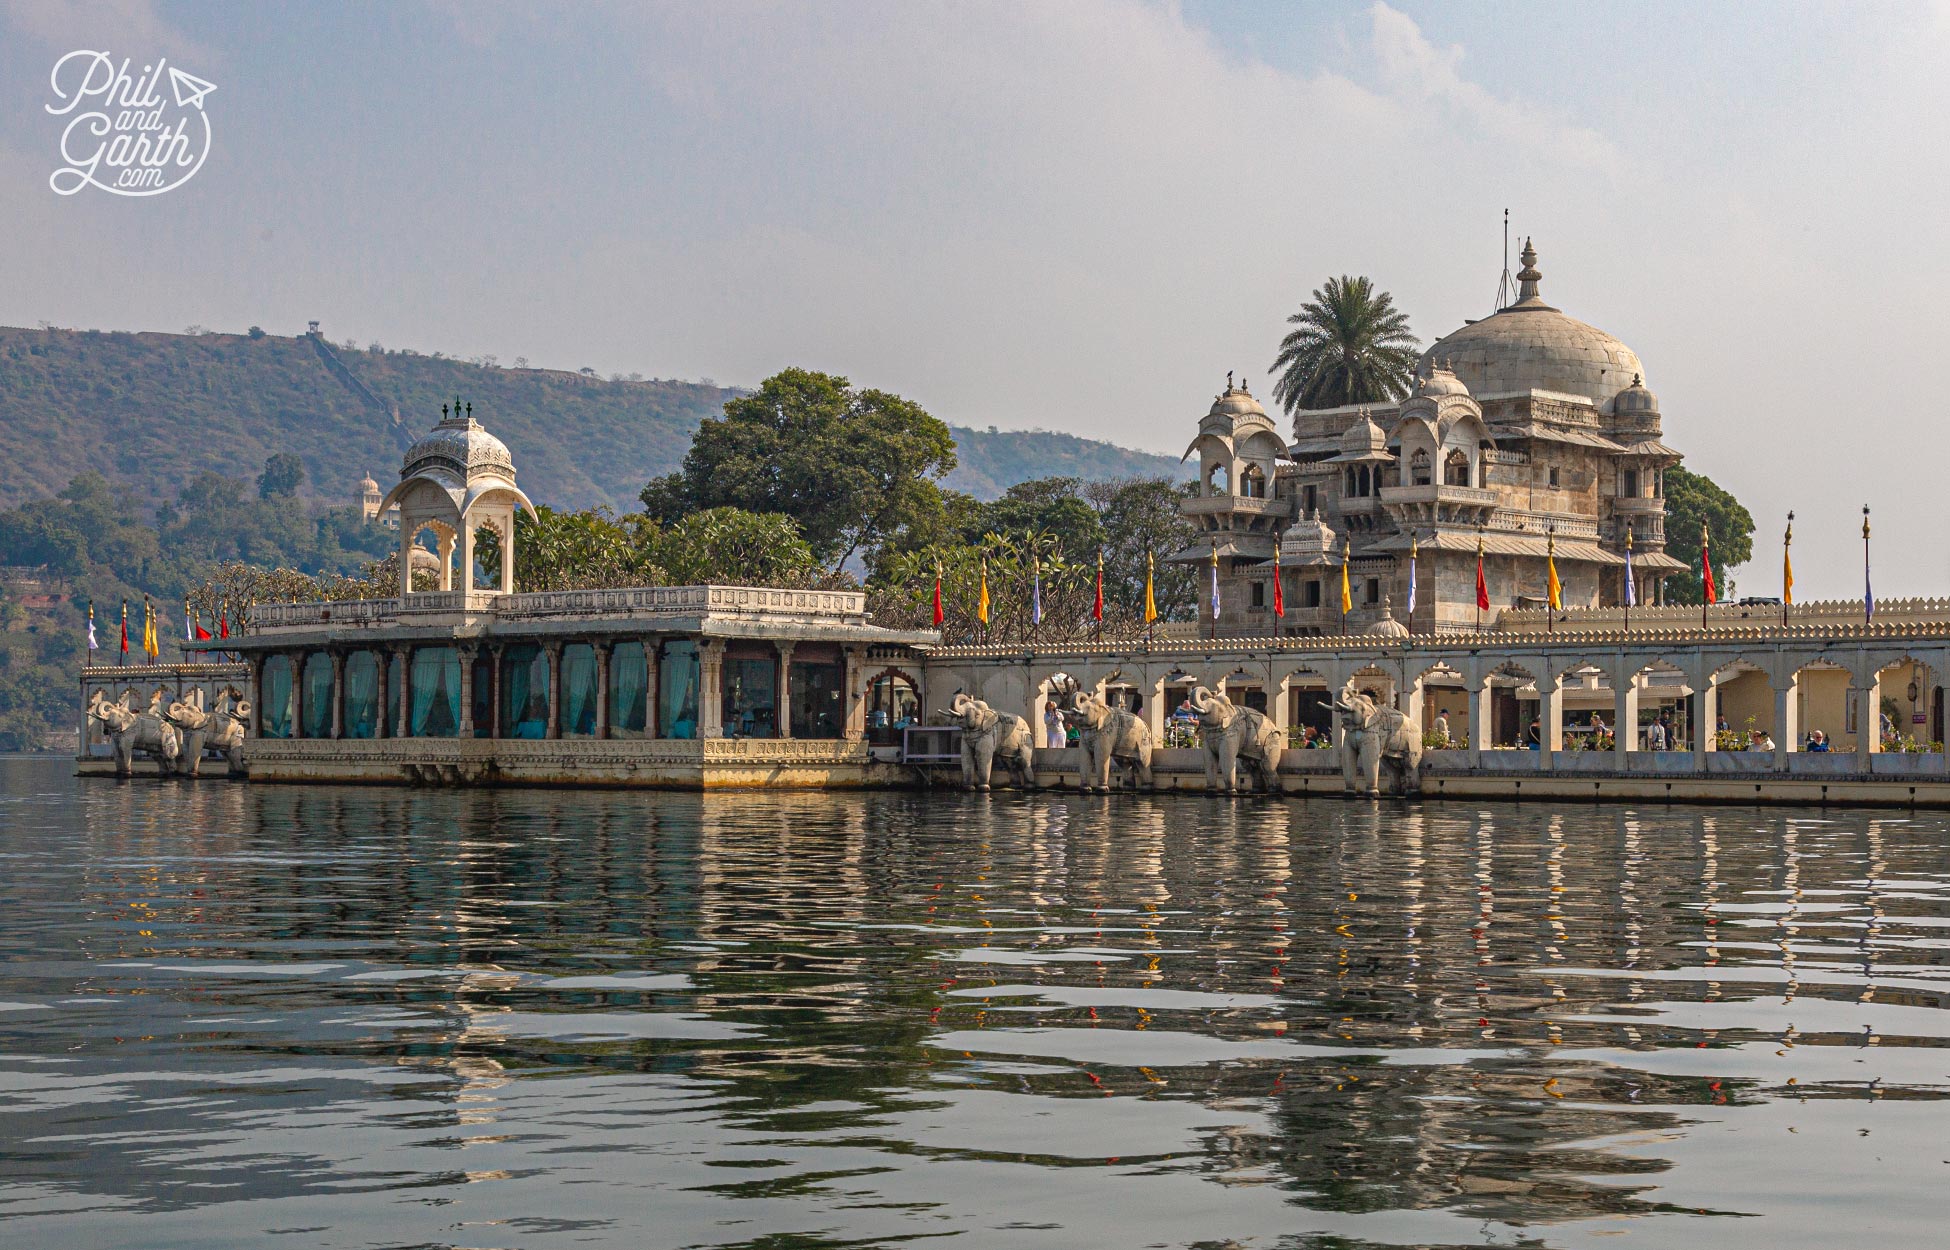 Boat trip on Lake Pichola to the Jagmandir Palace, now a hotel